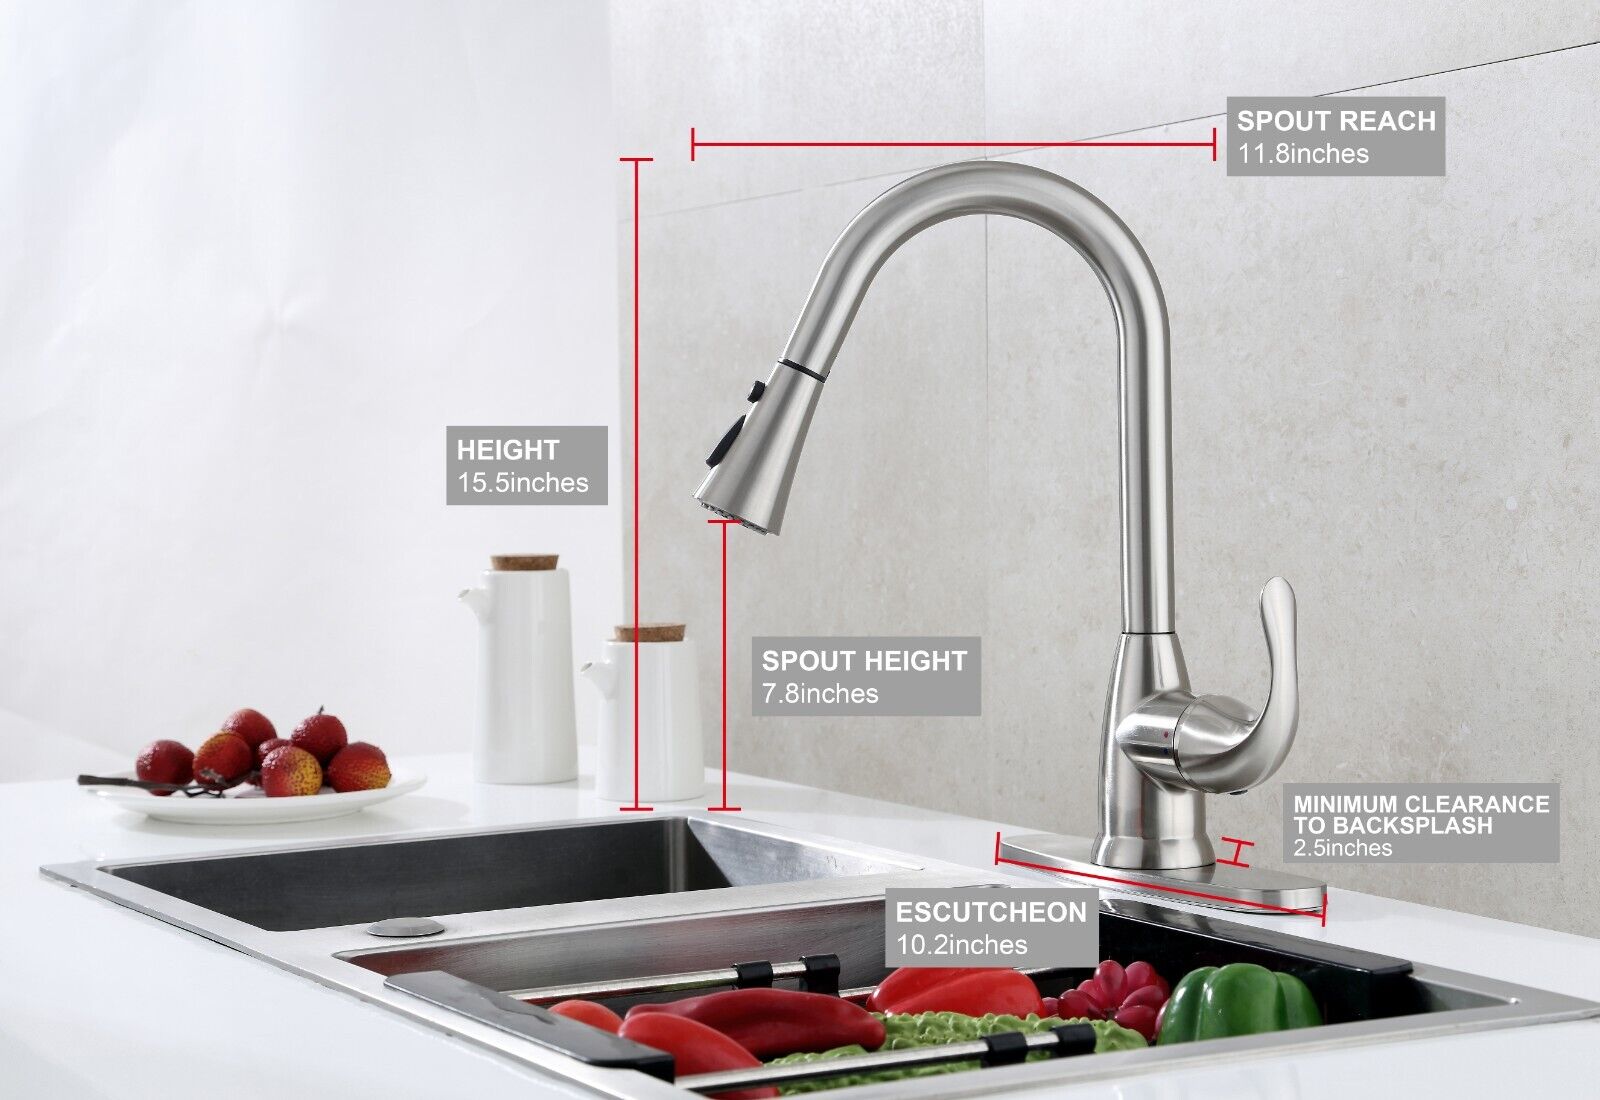 Frigidaire Alexis Single Handle Pull Down Kitchen Sink Faucet in Brushed Nickel with 3 Function Spray Head 23-Frigidaire-Alexis-BN - image 2 of 9